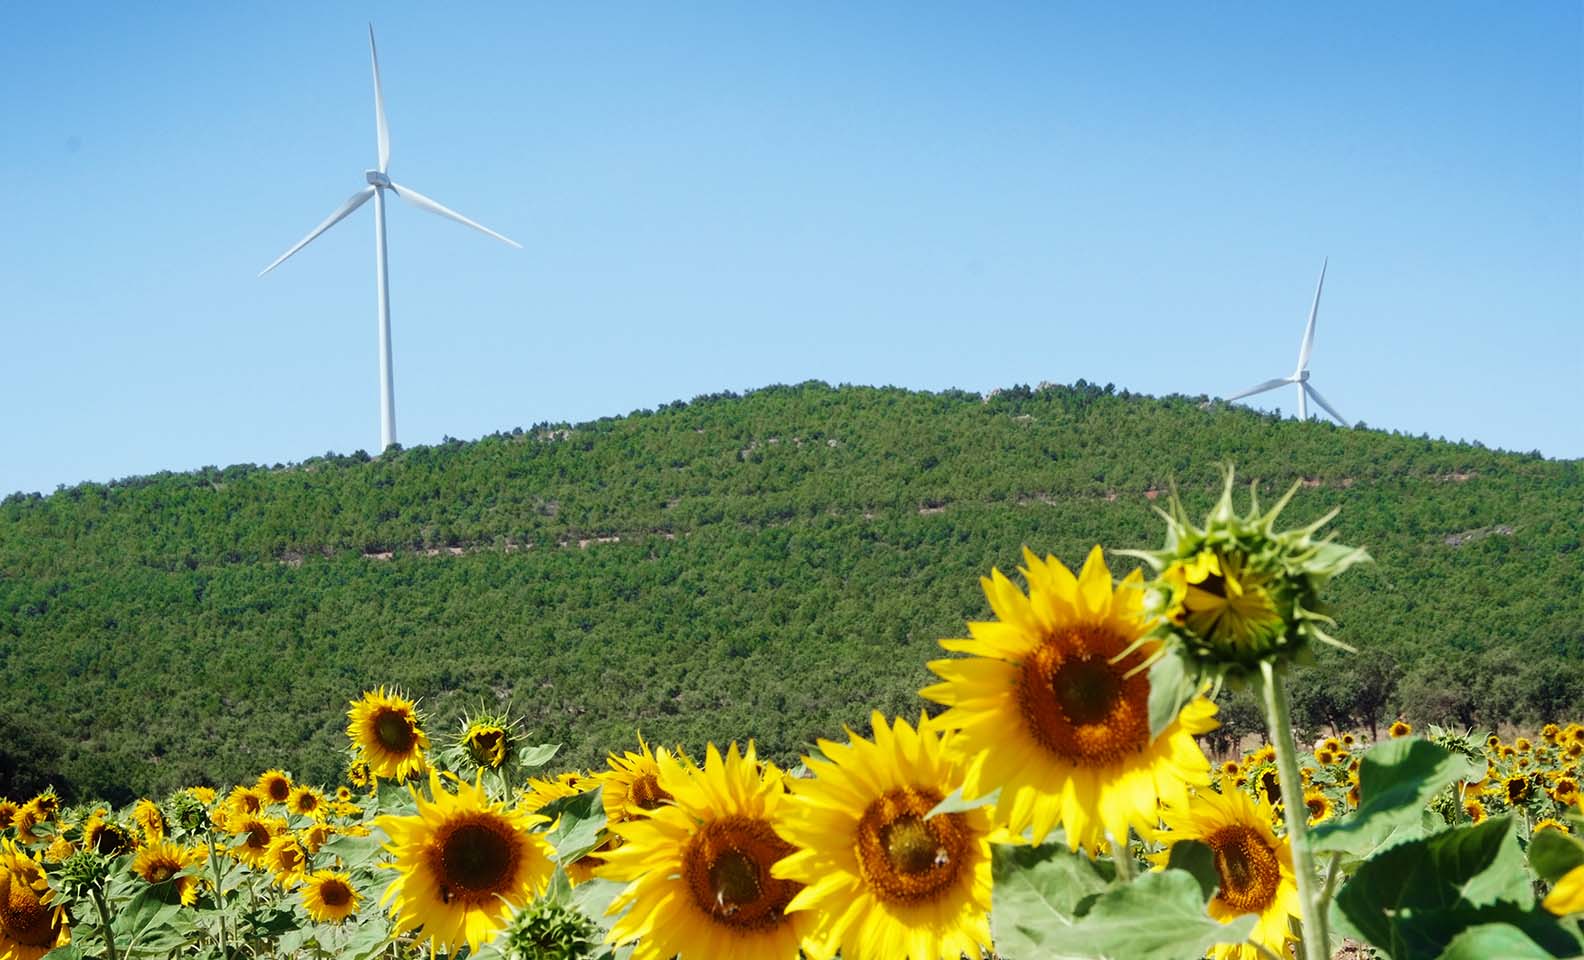 Wind turbines in the background with sunflowers in the foreground